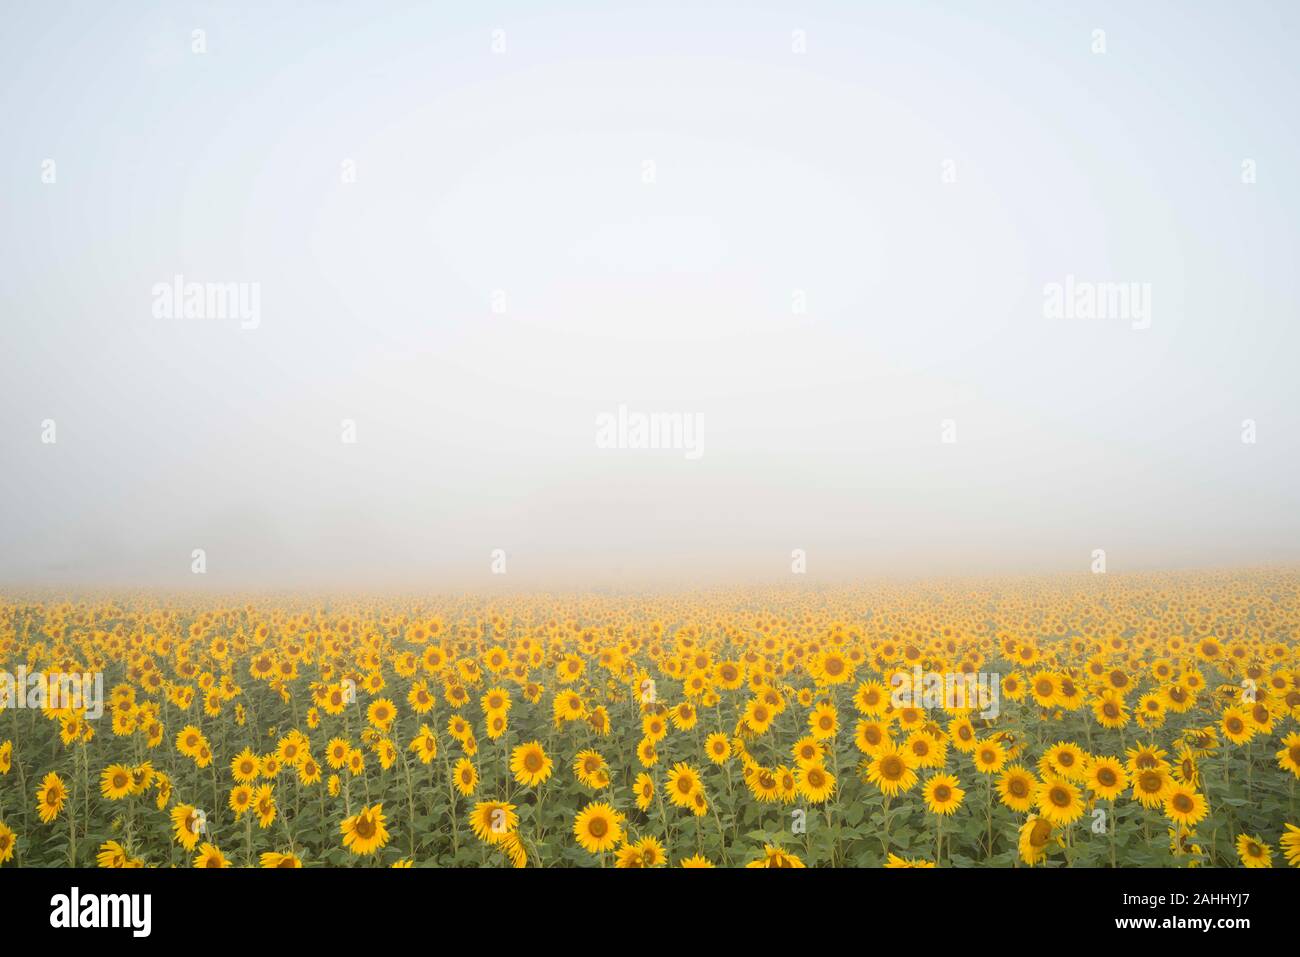 Sunflower field with lifting fog in Harford County, Maryland. Stock Photo